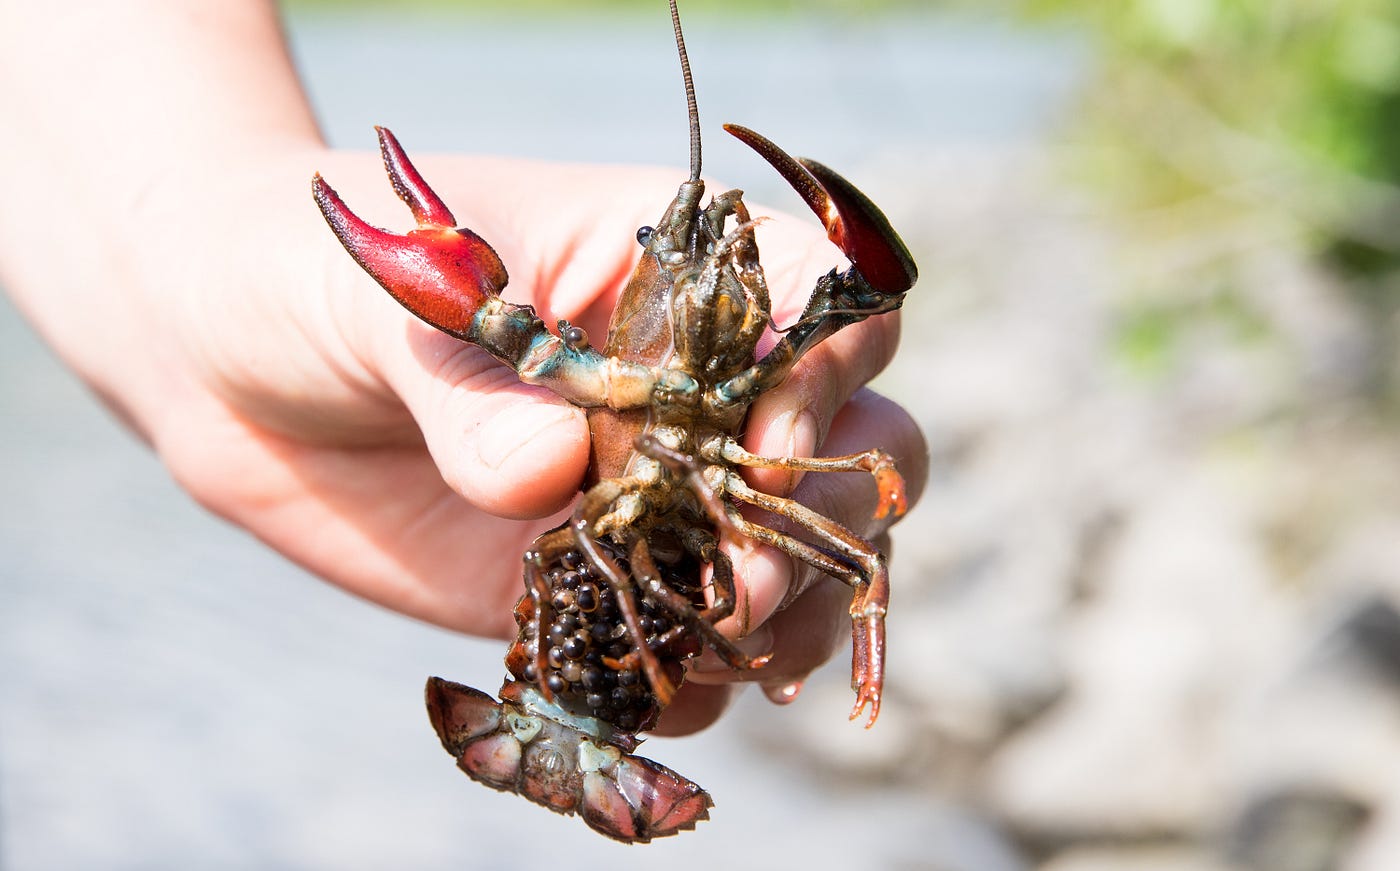 Bad 'dads: Crawdads of Kodiak. A conversation about crayfish in